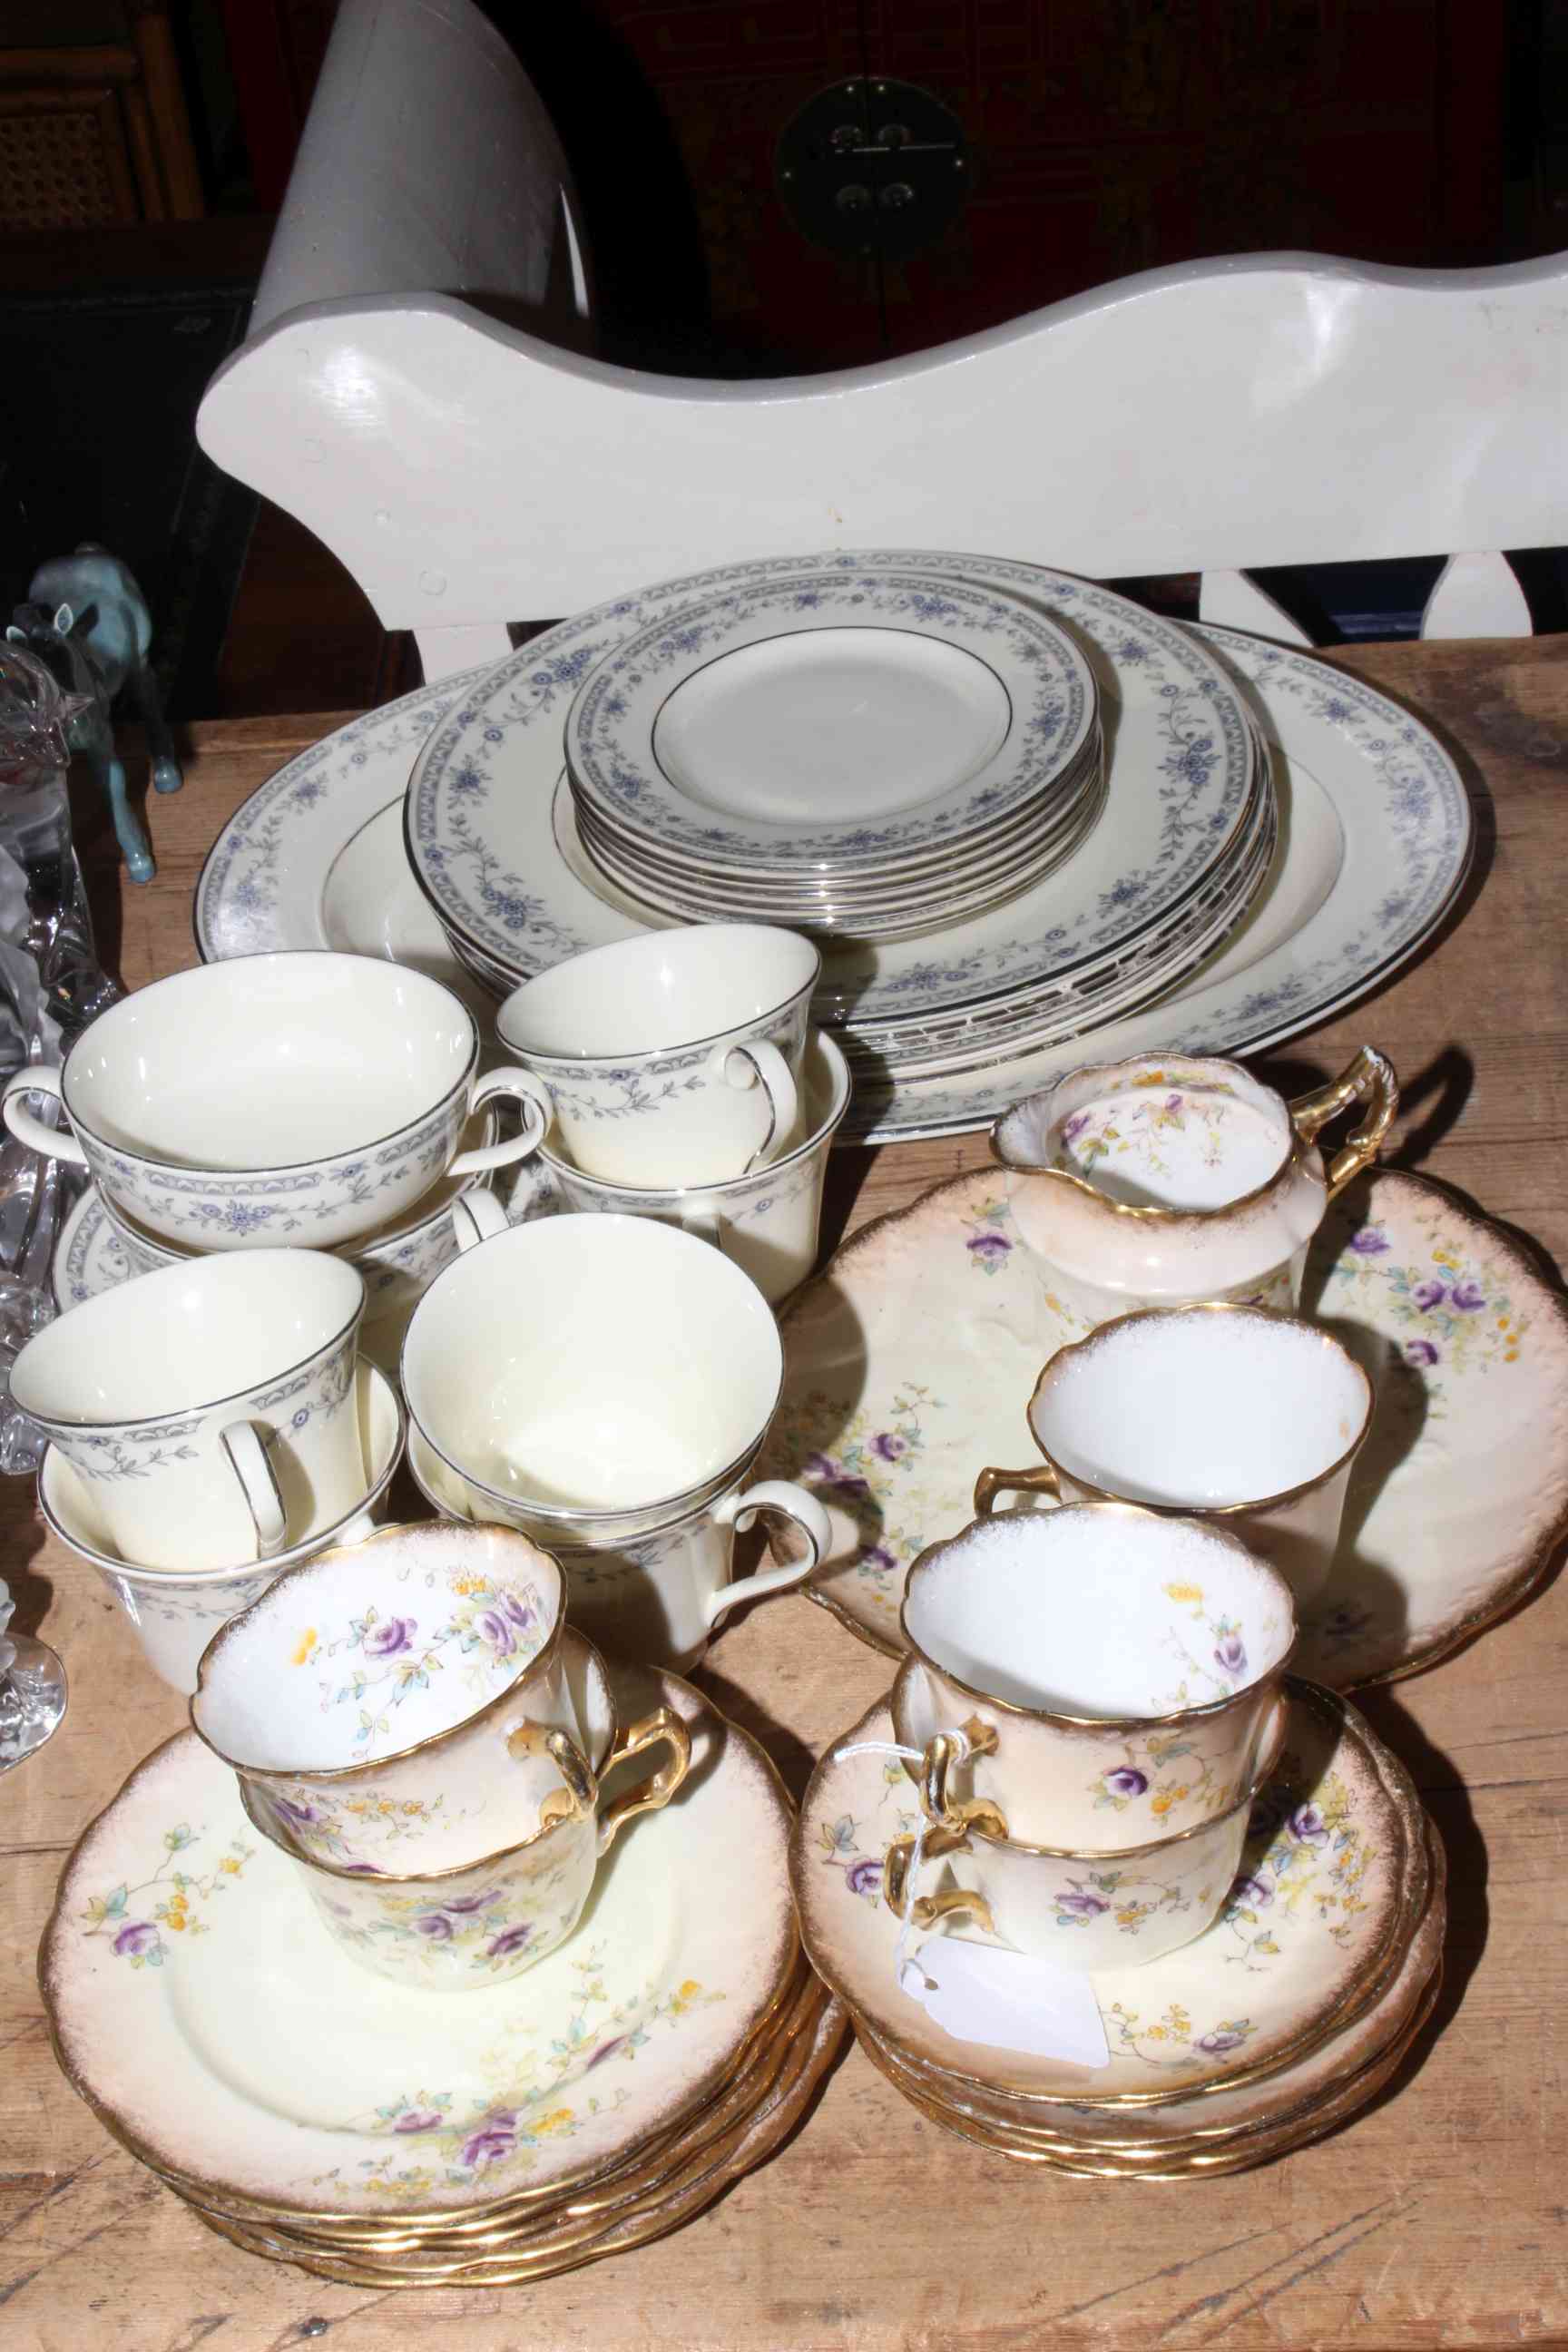 Minton 'Bellemeade' china including meat platter, and vintage floral china.